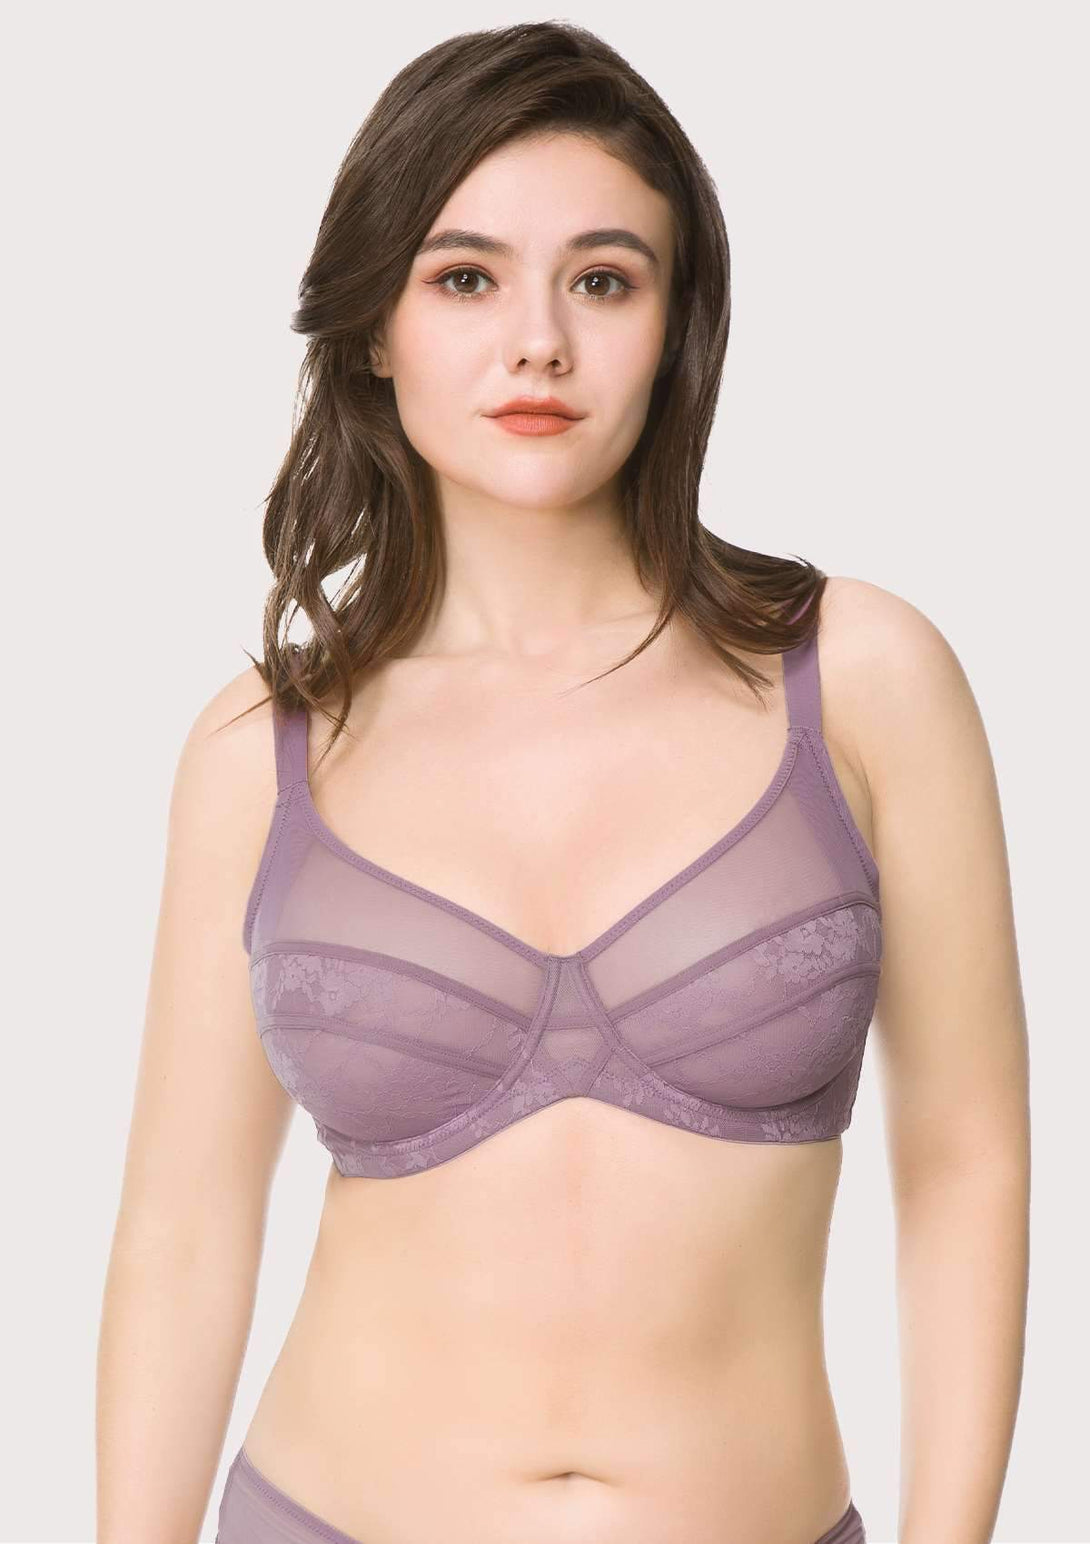 Shapeupstores The Florence: Sheer Stripe Lace Unlined Wireless Bralette